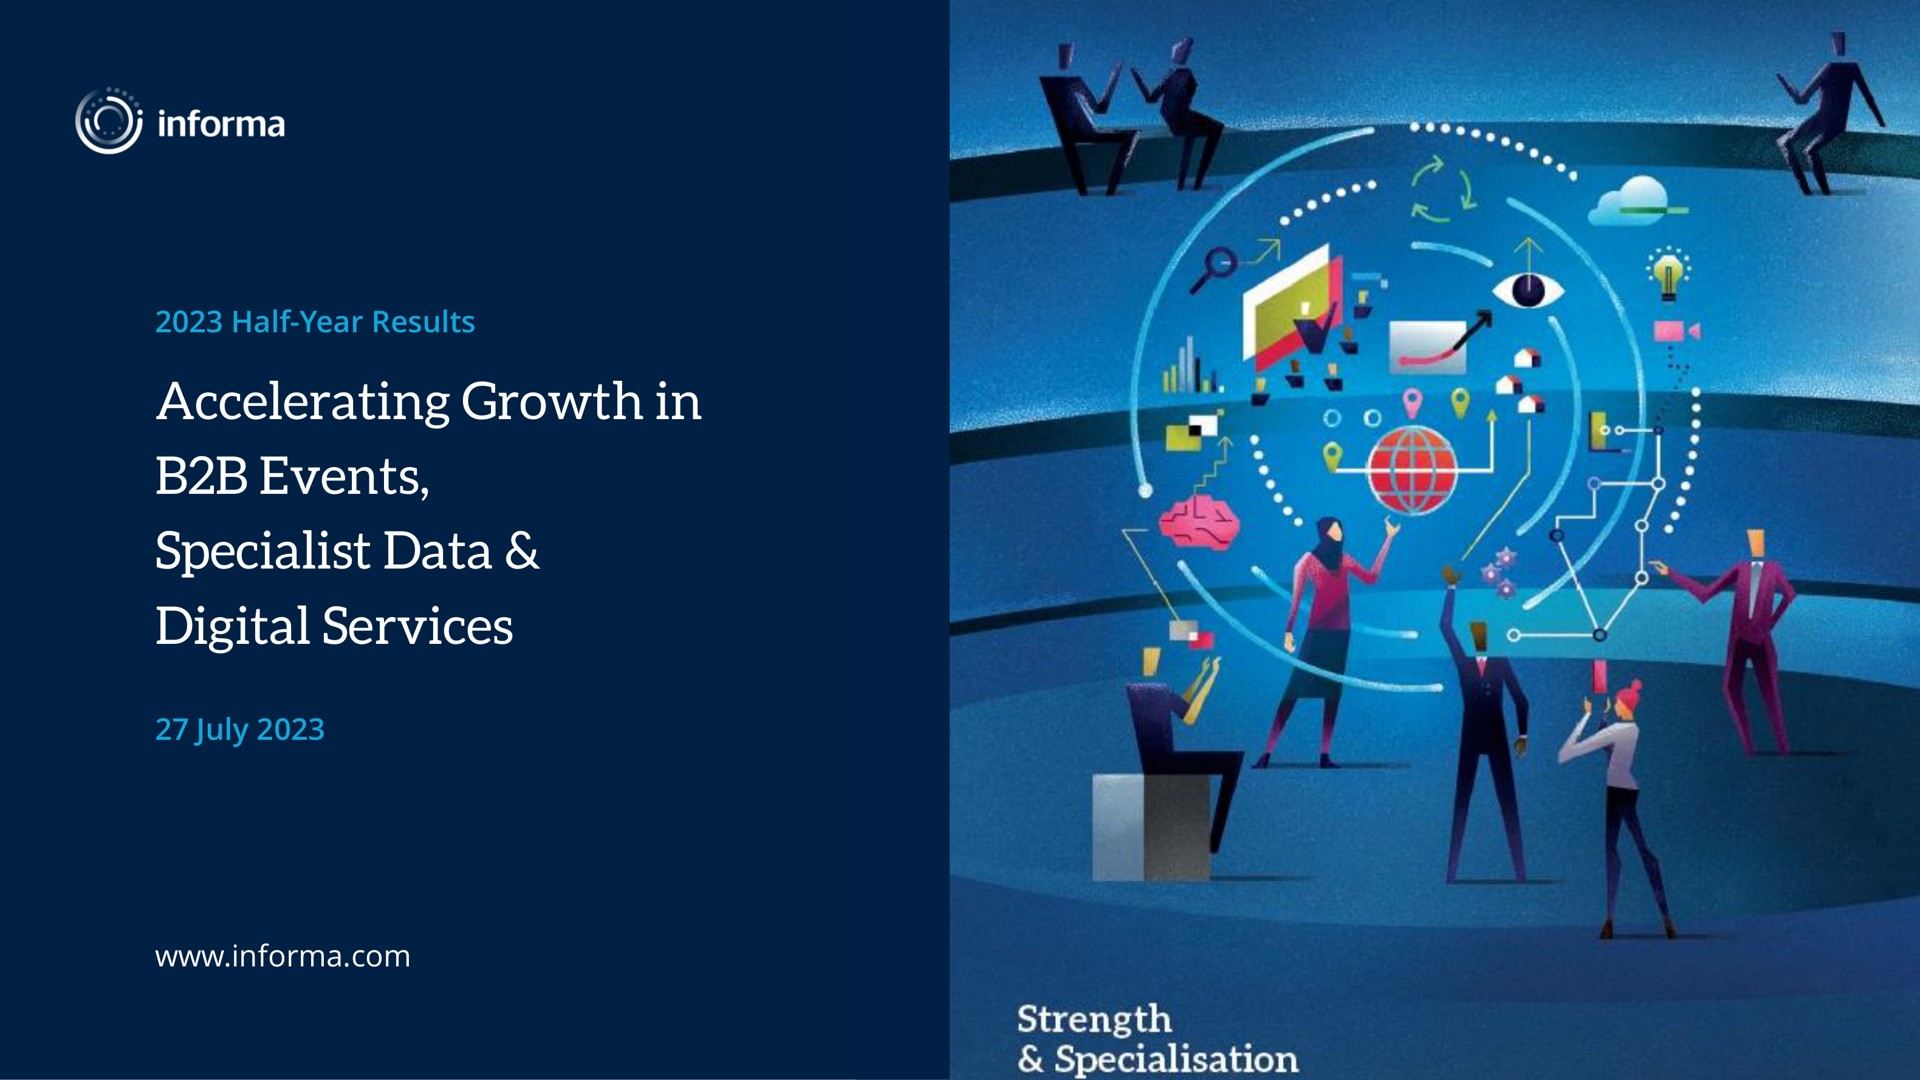 accelerating growth in events specialist data digital services | Informa